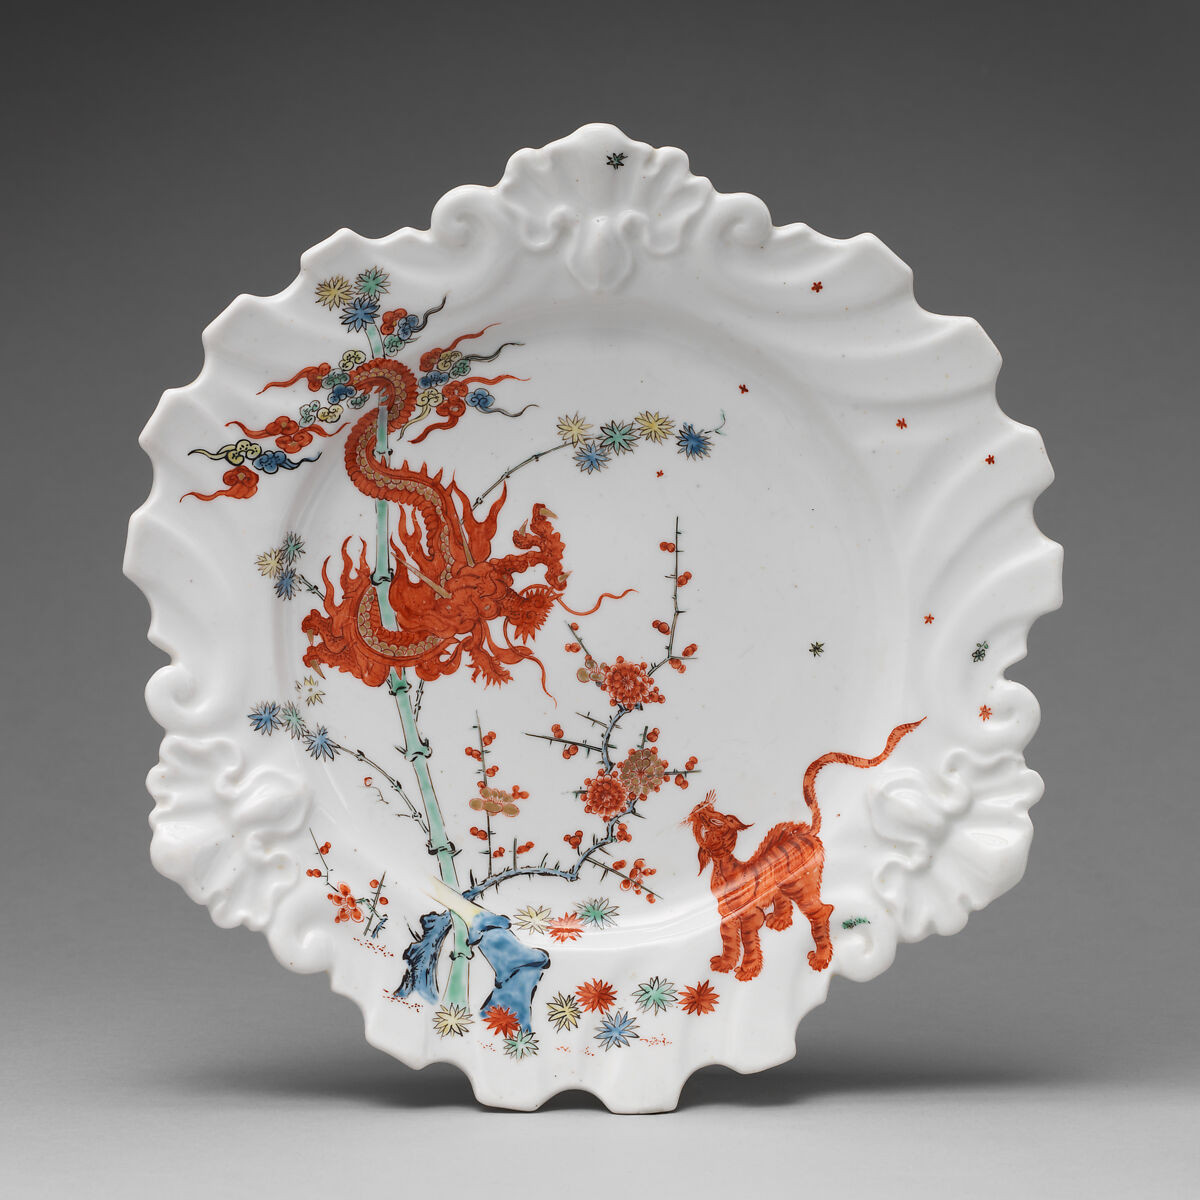 Plate decorated with Japanese Kakiemon-inspired scene with twisted dragon, Chelsea Porcelain Manufactory (British, 1744–1784), Soft-paste porcelain, British, Chelsea 